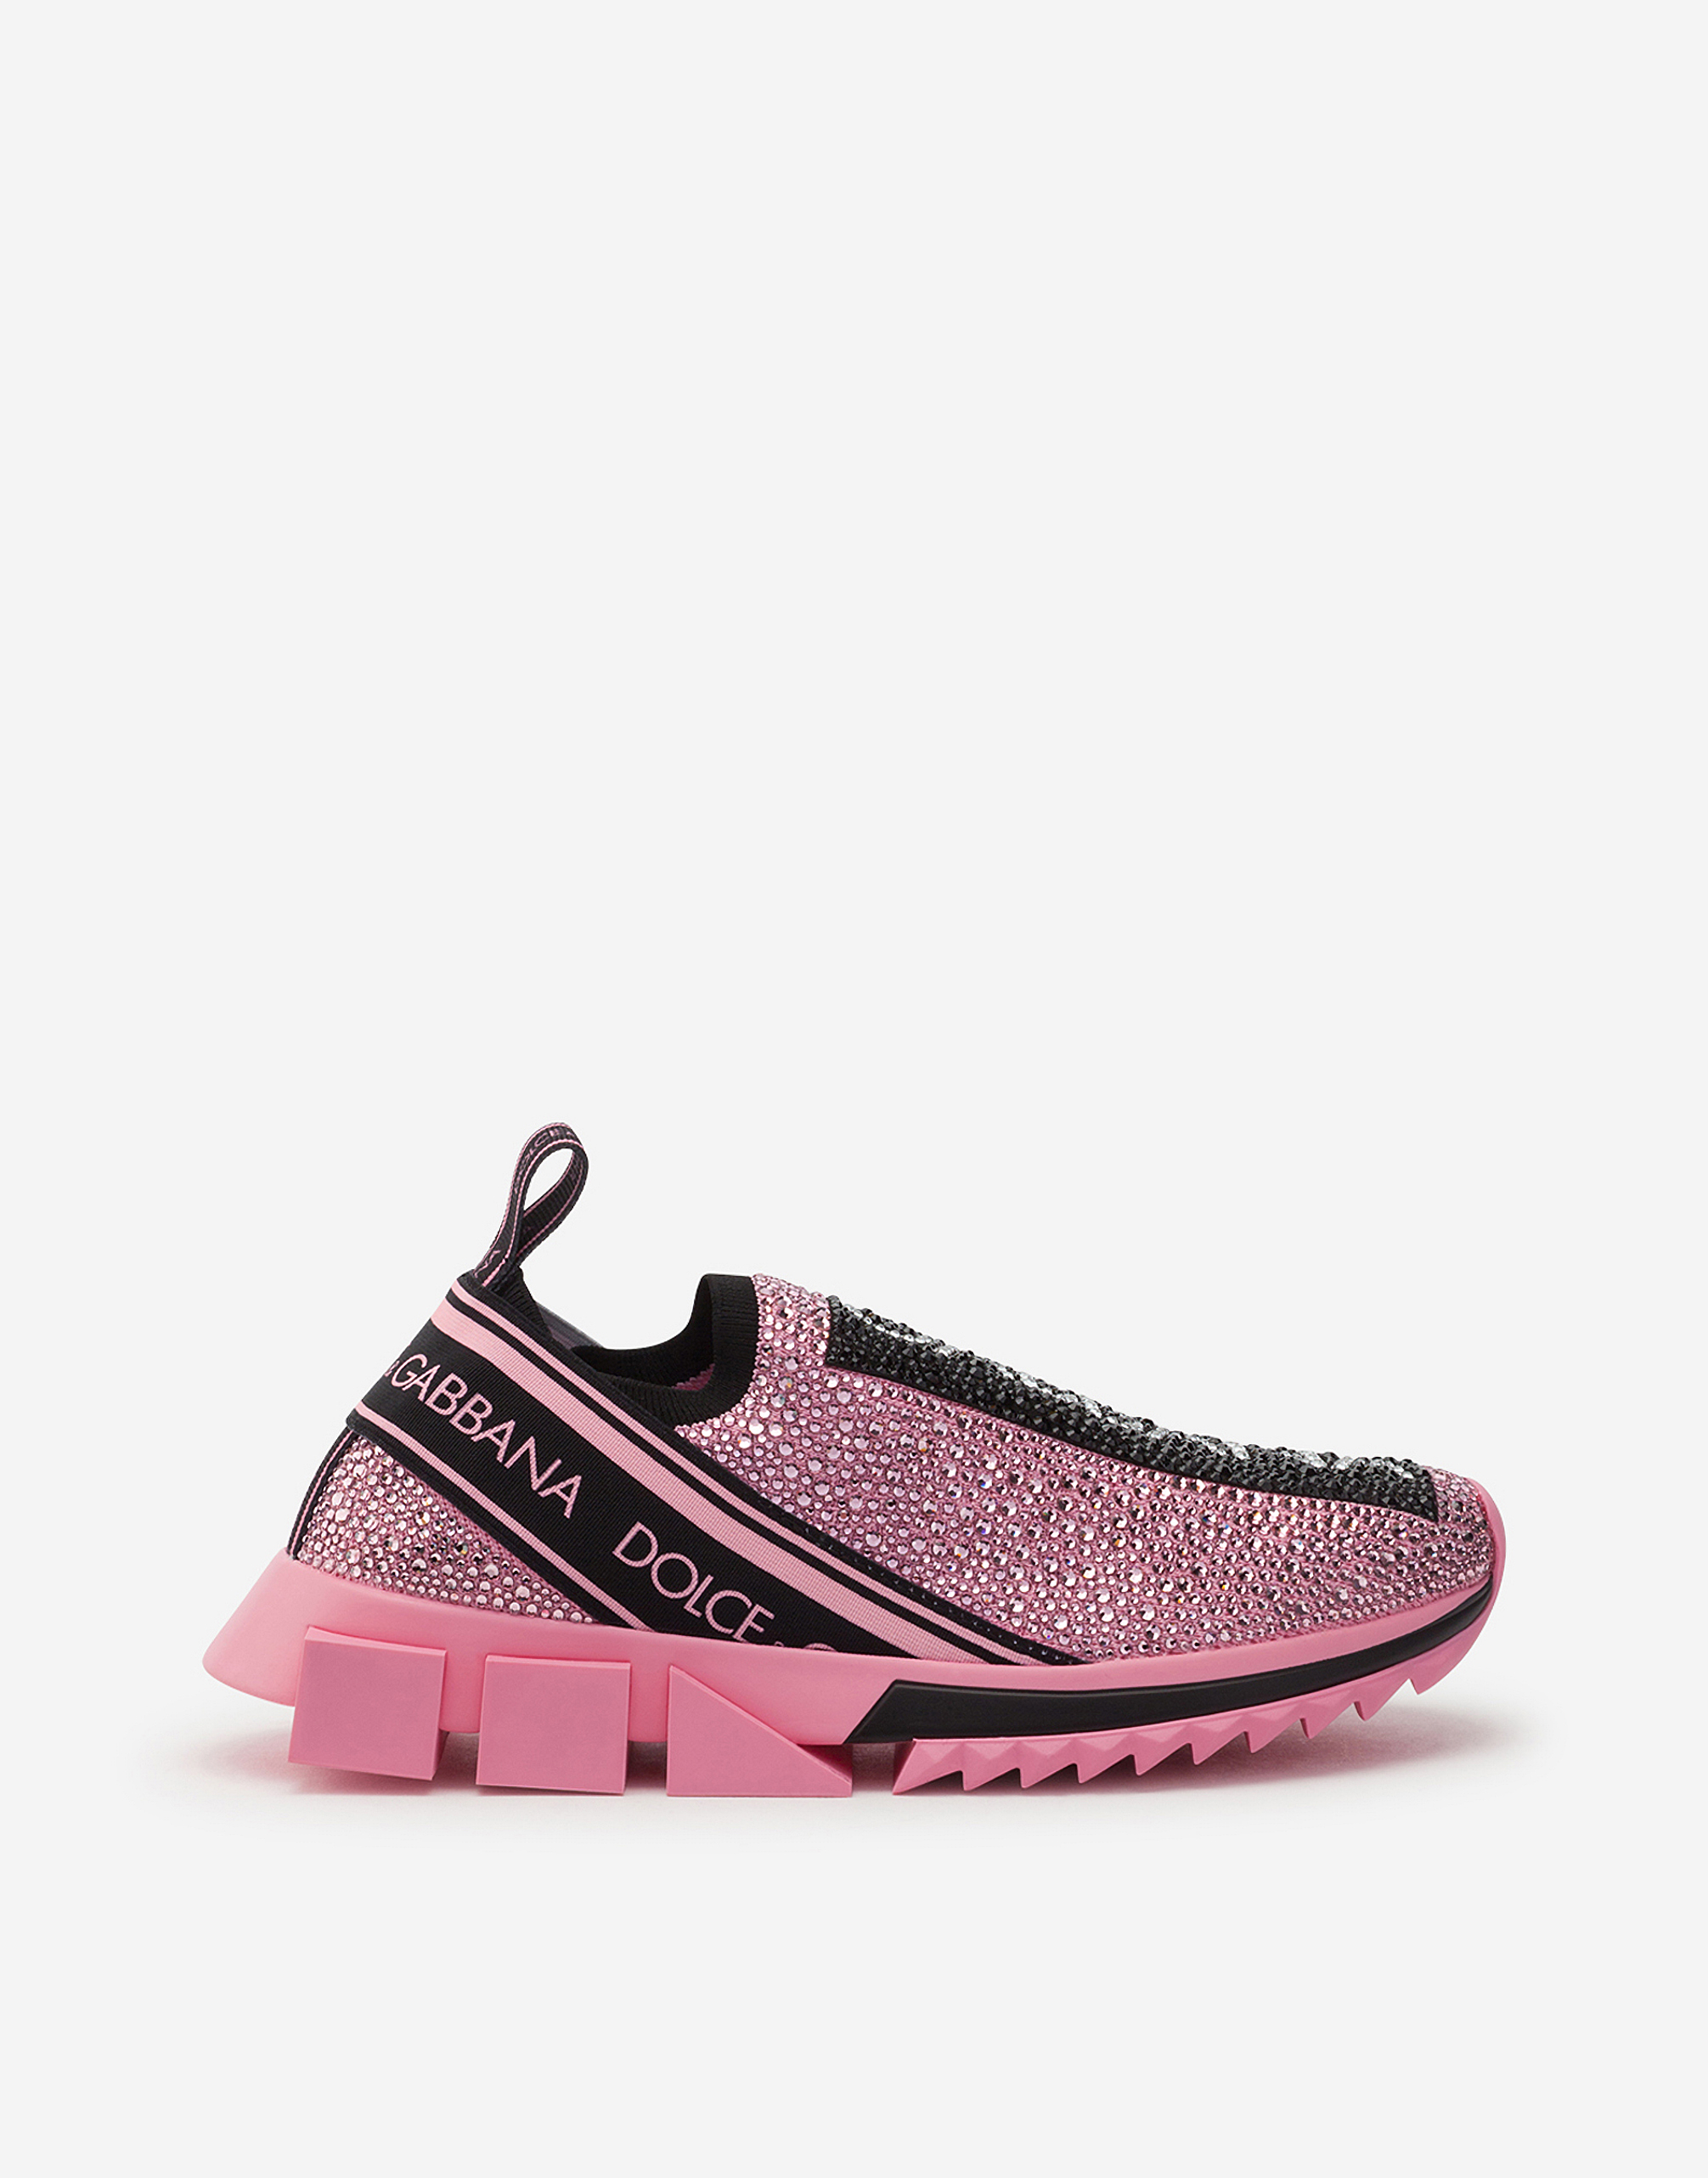 Sorrento termostrass sneakers in Pink